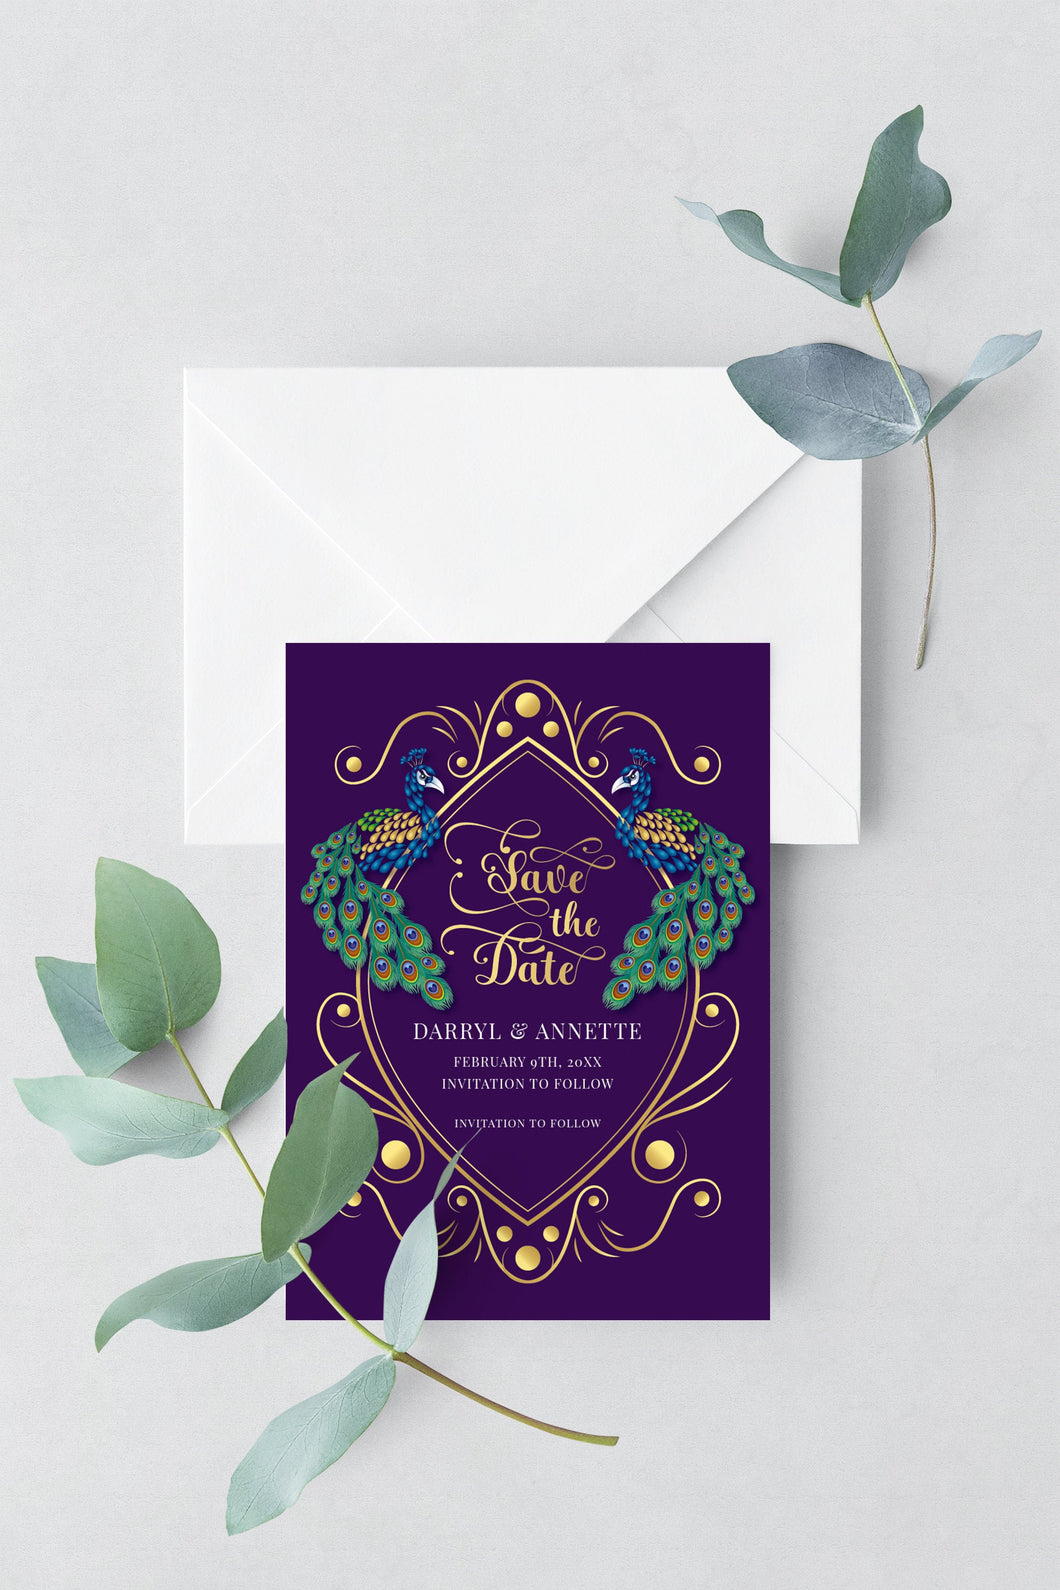 Save the Date Peacock Wedding Invitation Peacock Card Deep Purple Green Blue Design Printed Cards or Electronic Invite {Annette Collection}